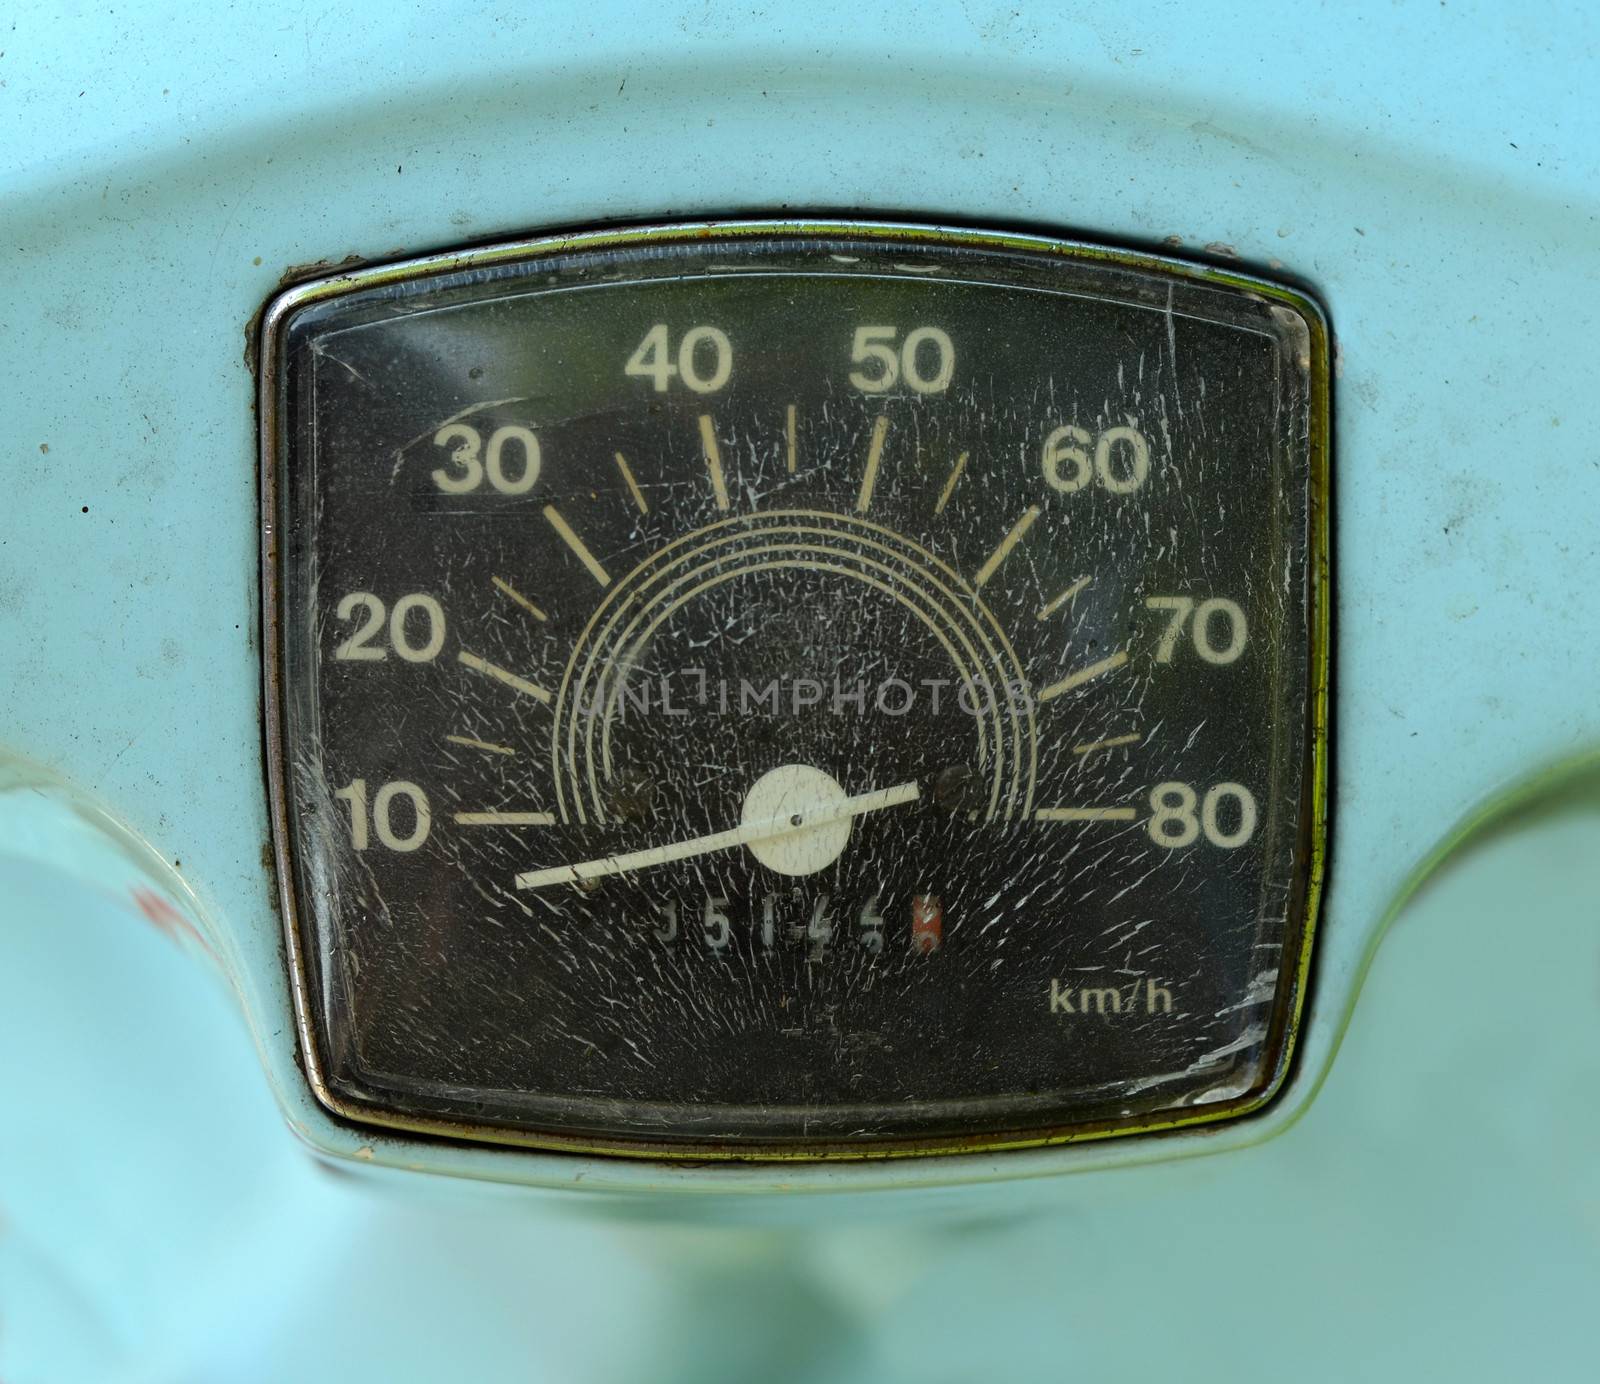 A Grungy Speedometer On A Sky Blue Scooter